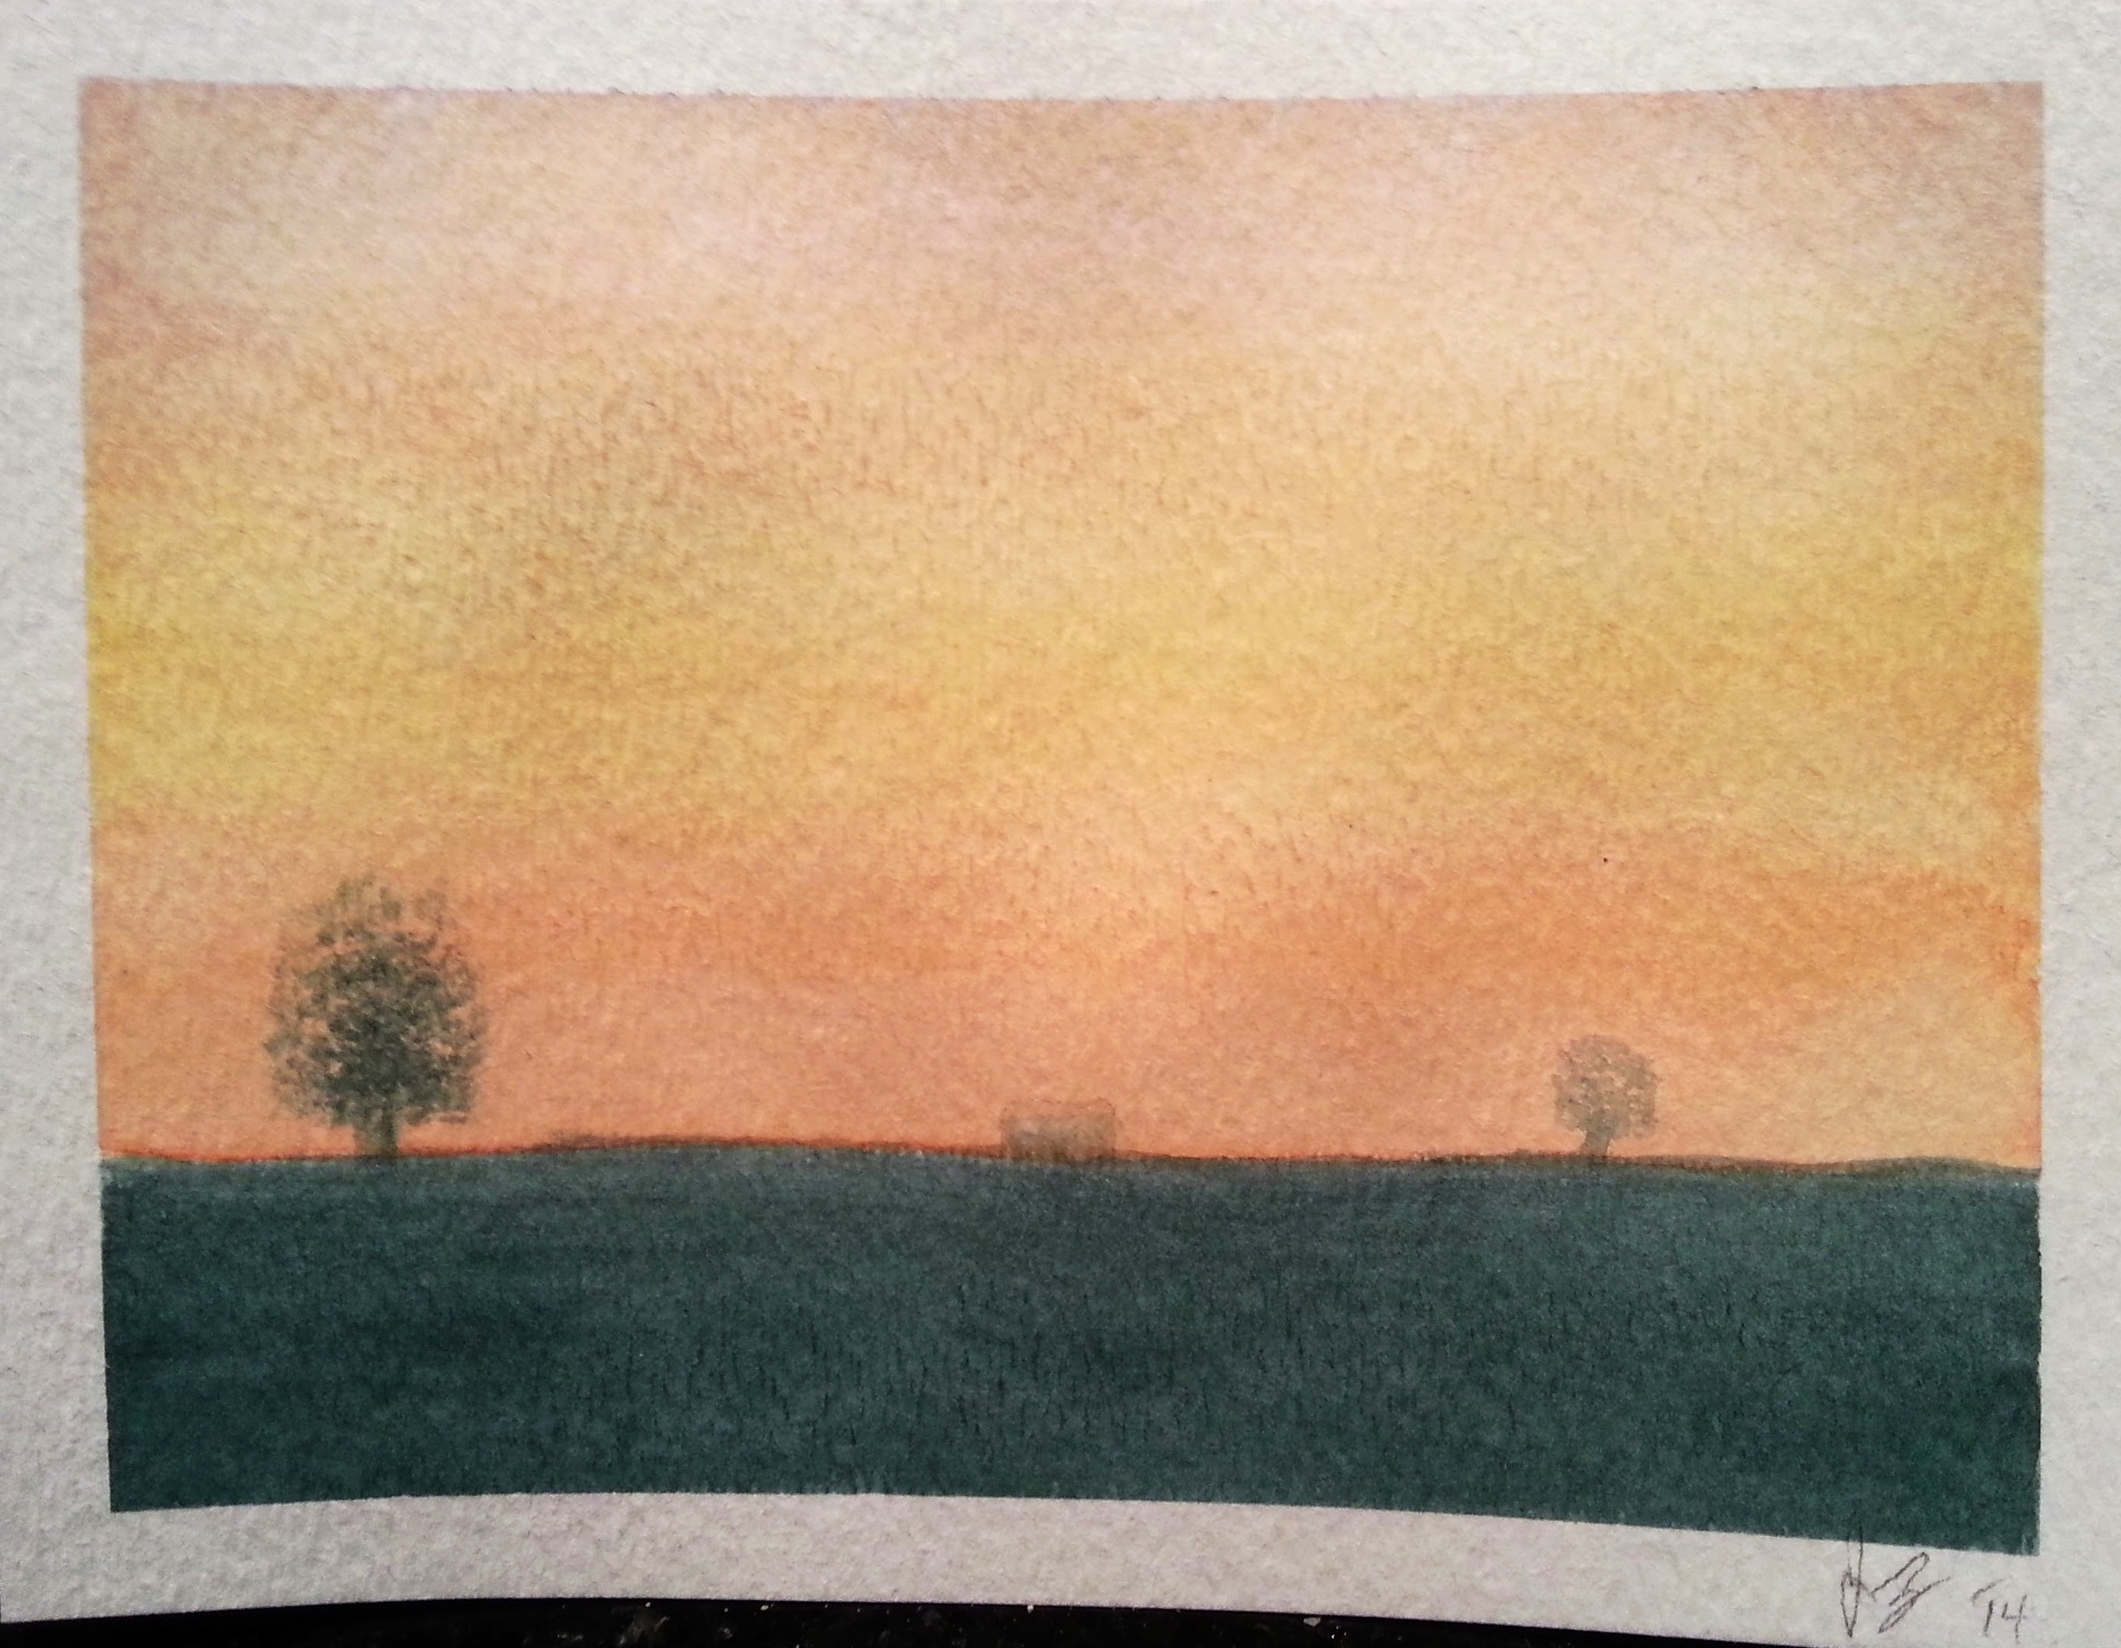  February, 2014  Attempt #2 at painting a sunset. 